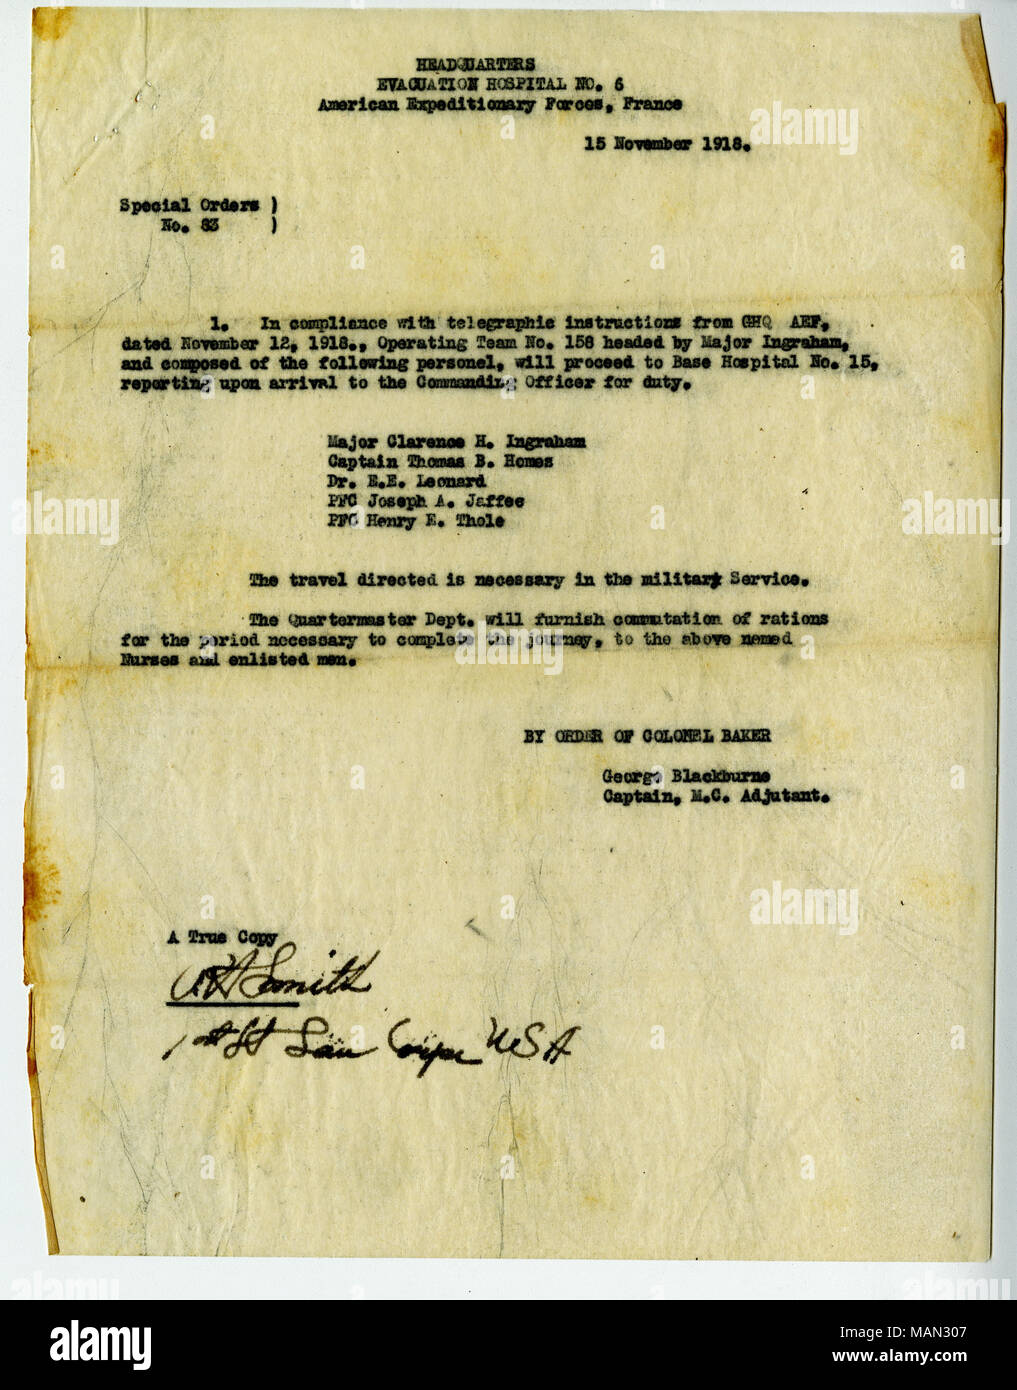 Colonel Baker issued this special order directing Dr. Esther E. Leonard to report to duty at Base Hospital No. 15. Dr. Leonard served as a contract surgeon during World War I at the U.S. Army General Hospital No. 1 in New York City and at an evacuation hospital in Vichy, France.  Transcription: HEADQUARTERS EVACUATION HOSPITAL NO. 6 American Expeditionary Forces, France 15 November 1918. Special Orders No. 83 1. In compliance with telegraphic instructions from GHQ AEF, dated November 12, 1918., Operating Team No. 158 headed by Major Ingraham, and composed of the following personel, will procee Stock Photo